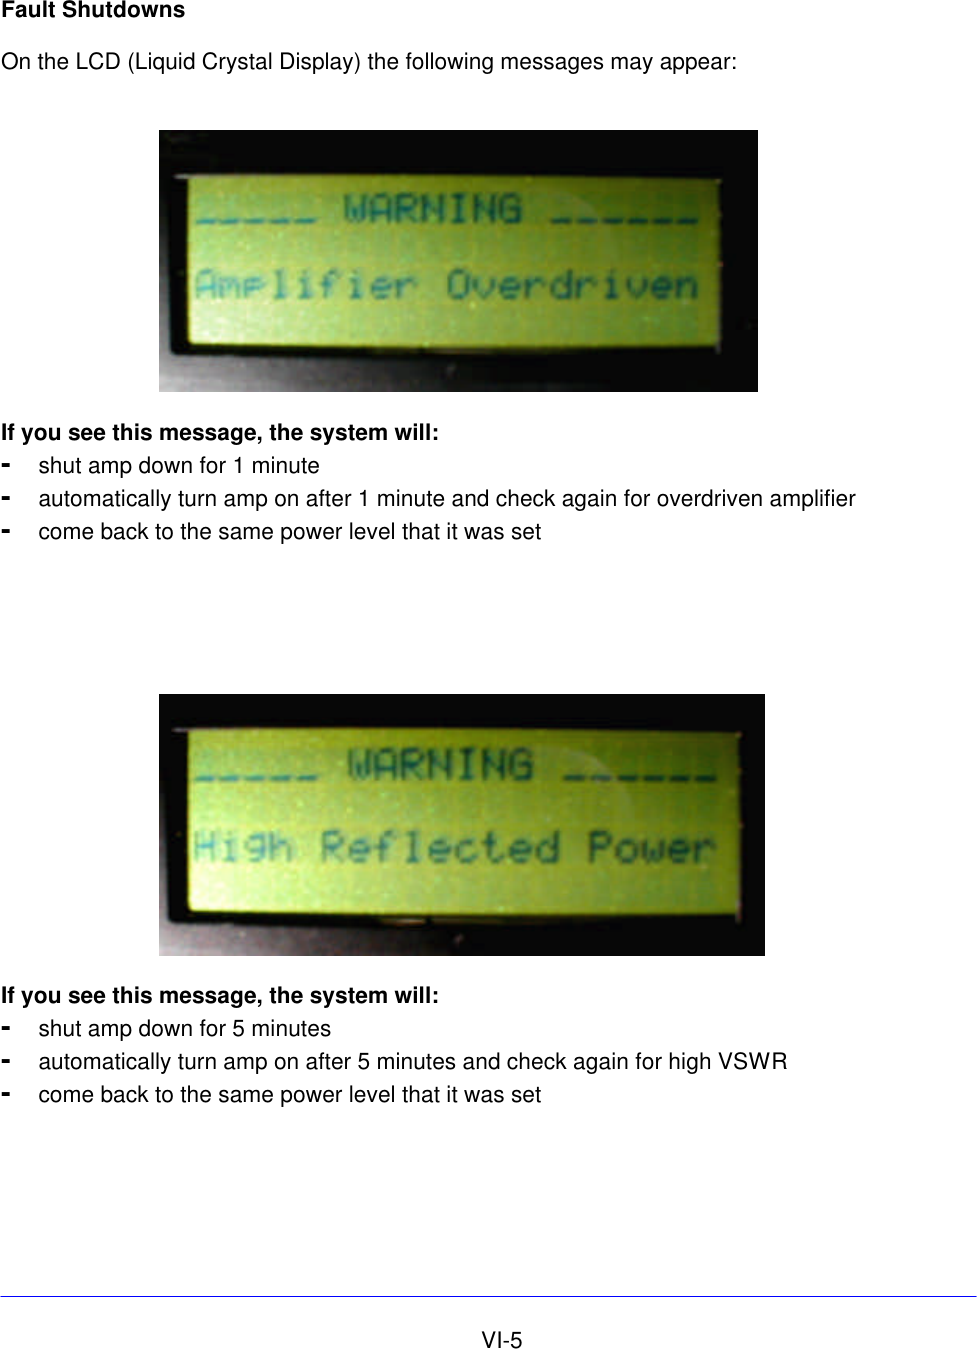     VI-5 Fault Shutdowns  On the LCD (Liquid Crystal Display) the following messages may appear:    If you see this message, the system will: - shut amp down for 1 minute  - automatically turn amp on after 1 minute and check again for overdriven amplifier - come back to the same power level that it was set       If you see this message, the system will: - shut amp down for 5 minutes - automatically turn amp on after 5 minutes and check again for high VSWR - come back to the same power level that it was set 